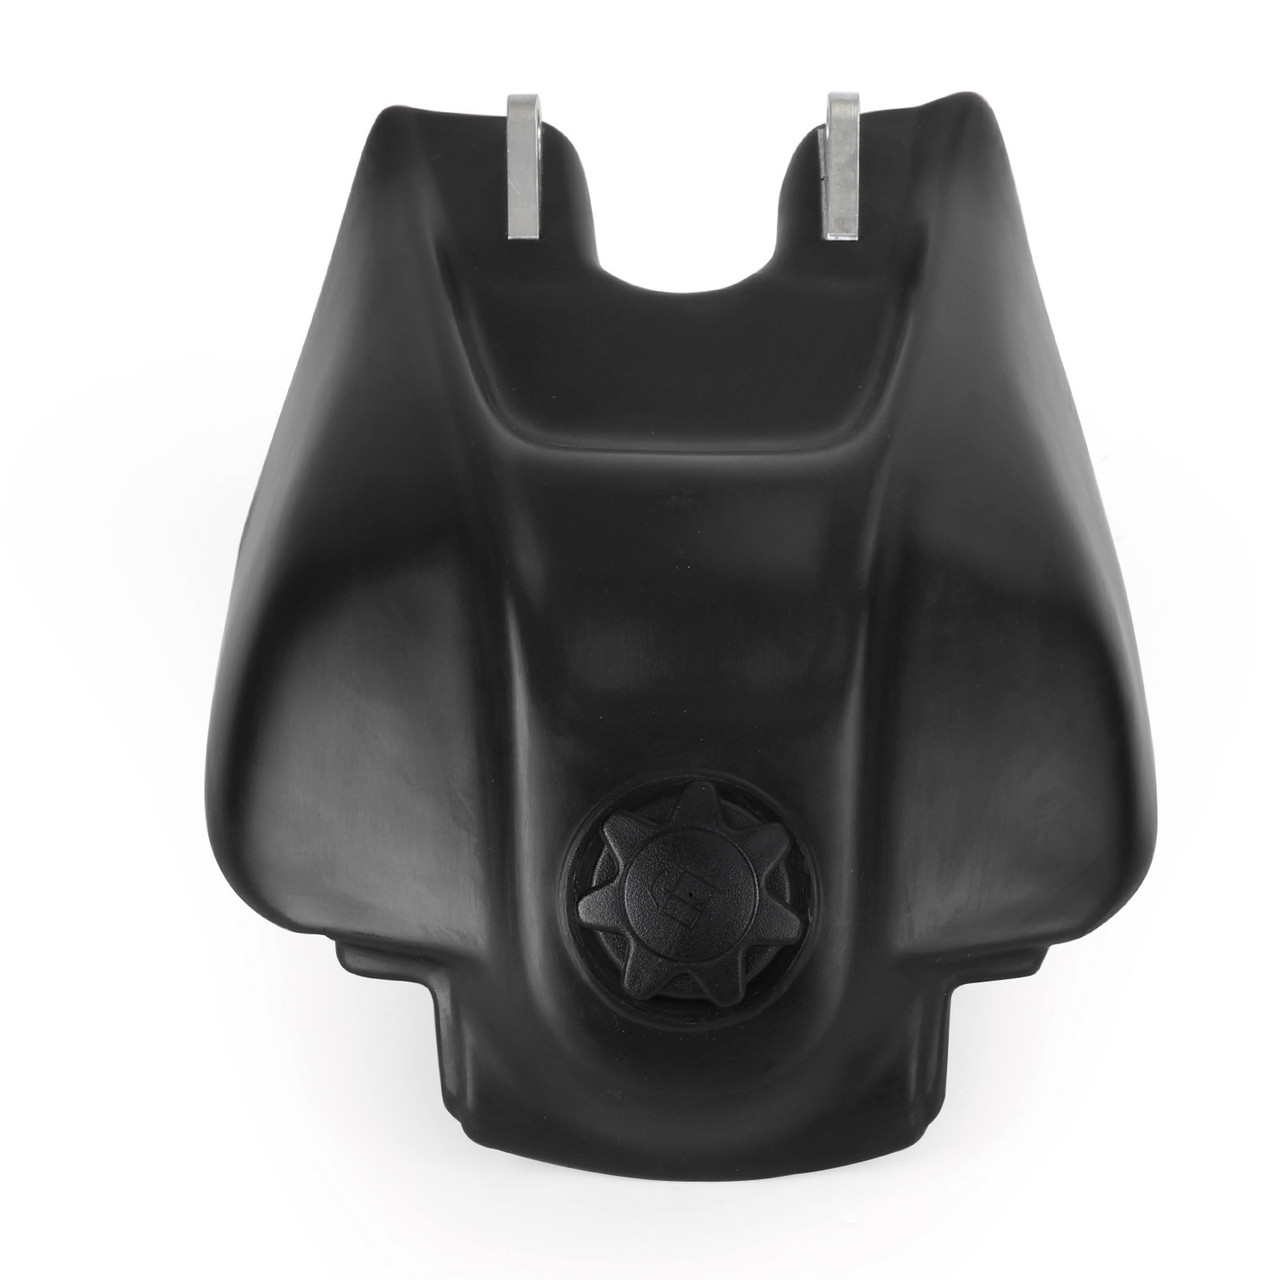 Replacement Plastic Fuel GAS Tank Fit for Honda ATC250R 3-WHEELER 1985-1986 Black